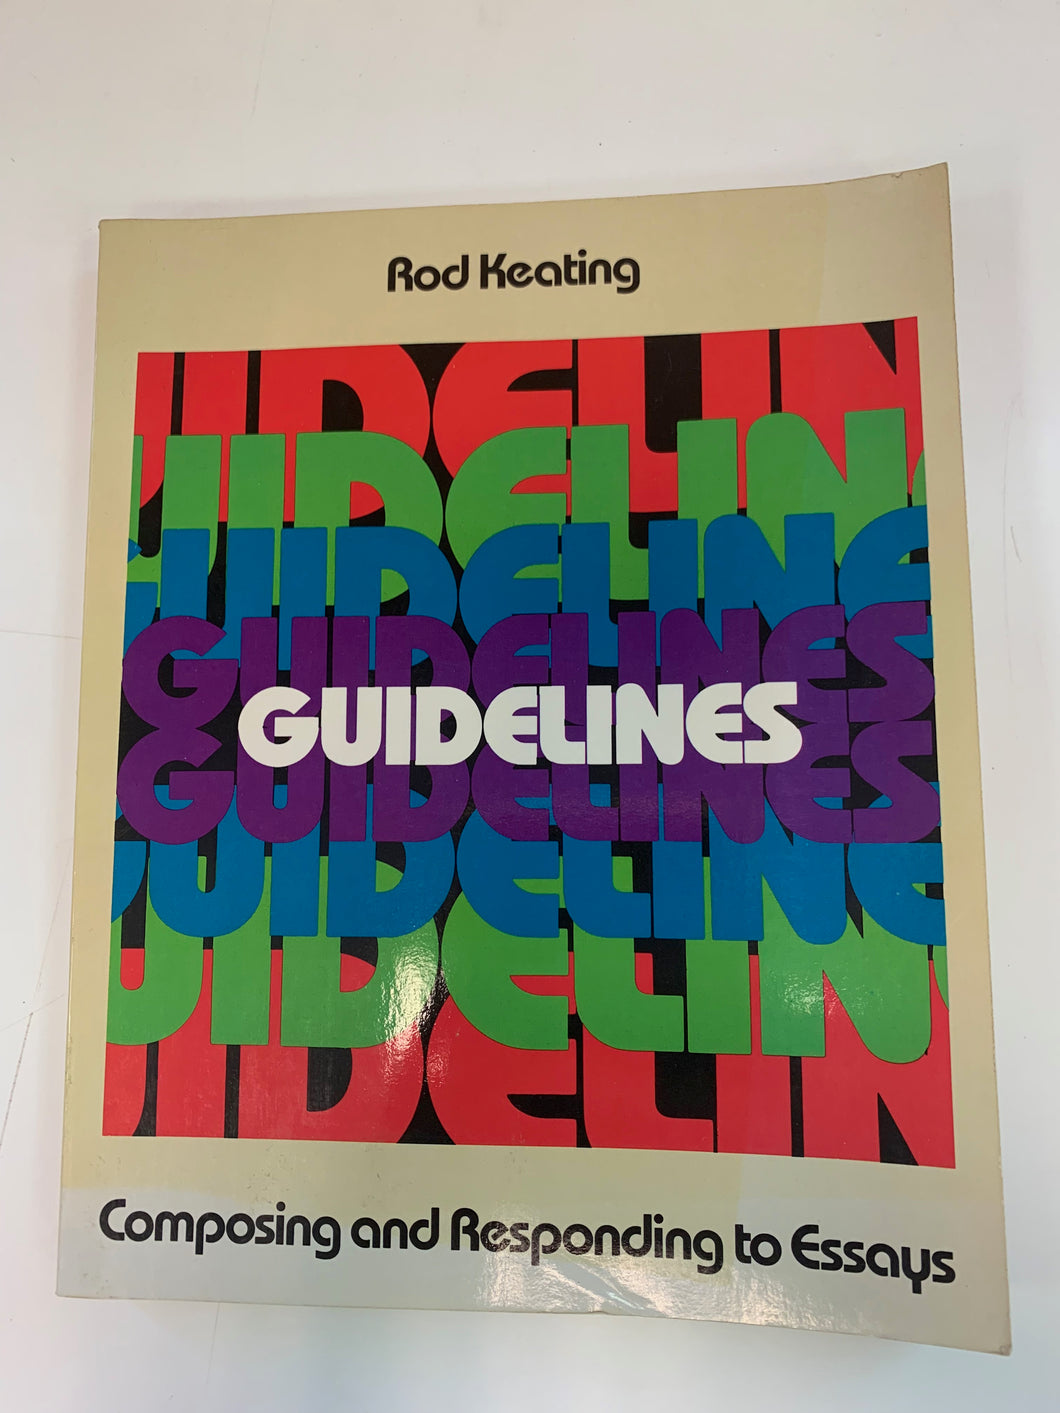 Guidelines: Composing and Responding to Essays by Rod Keating